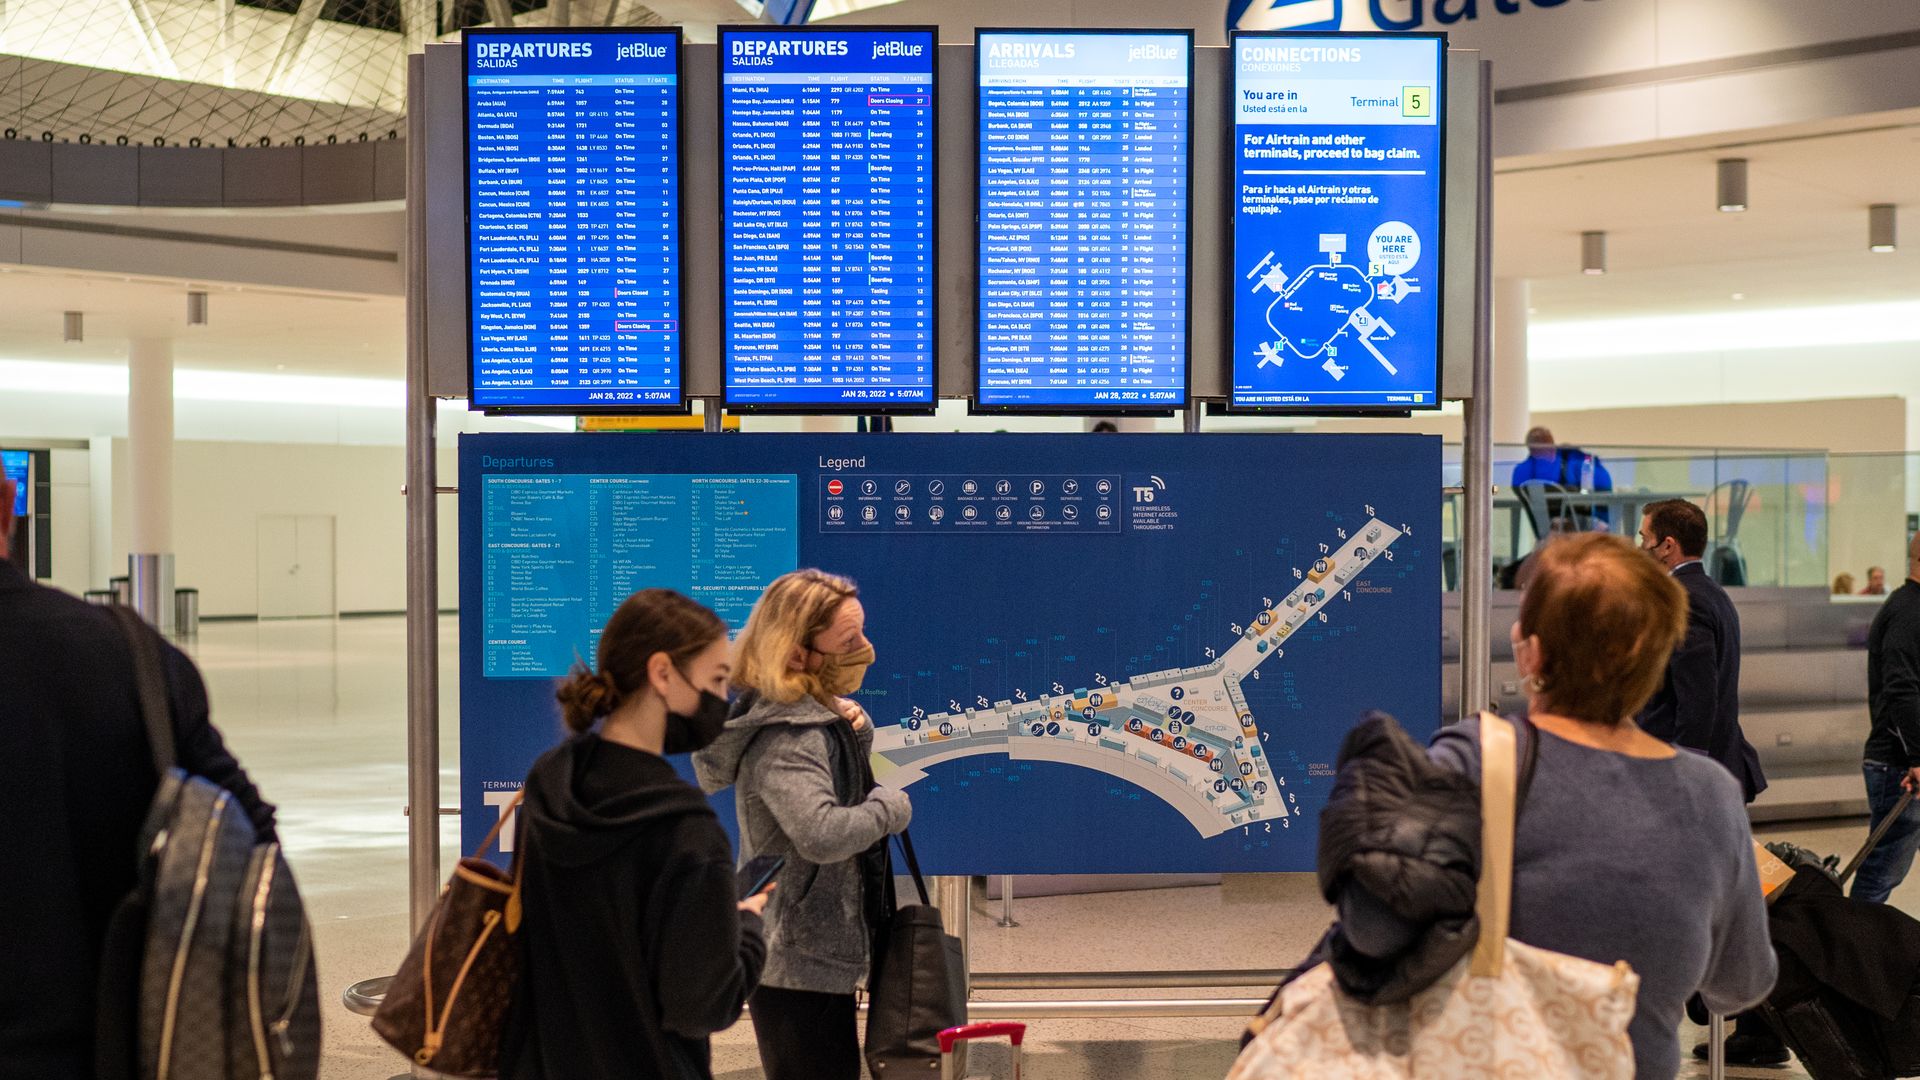  Airline passengers check the departure and arrival board January 28, 2022 at John F. Kennedy International Airport